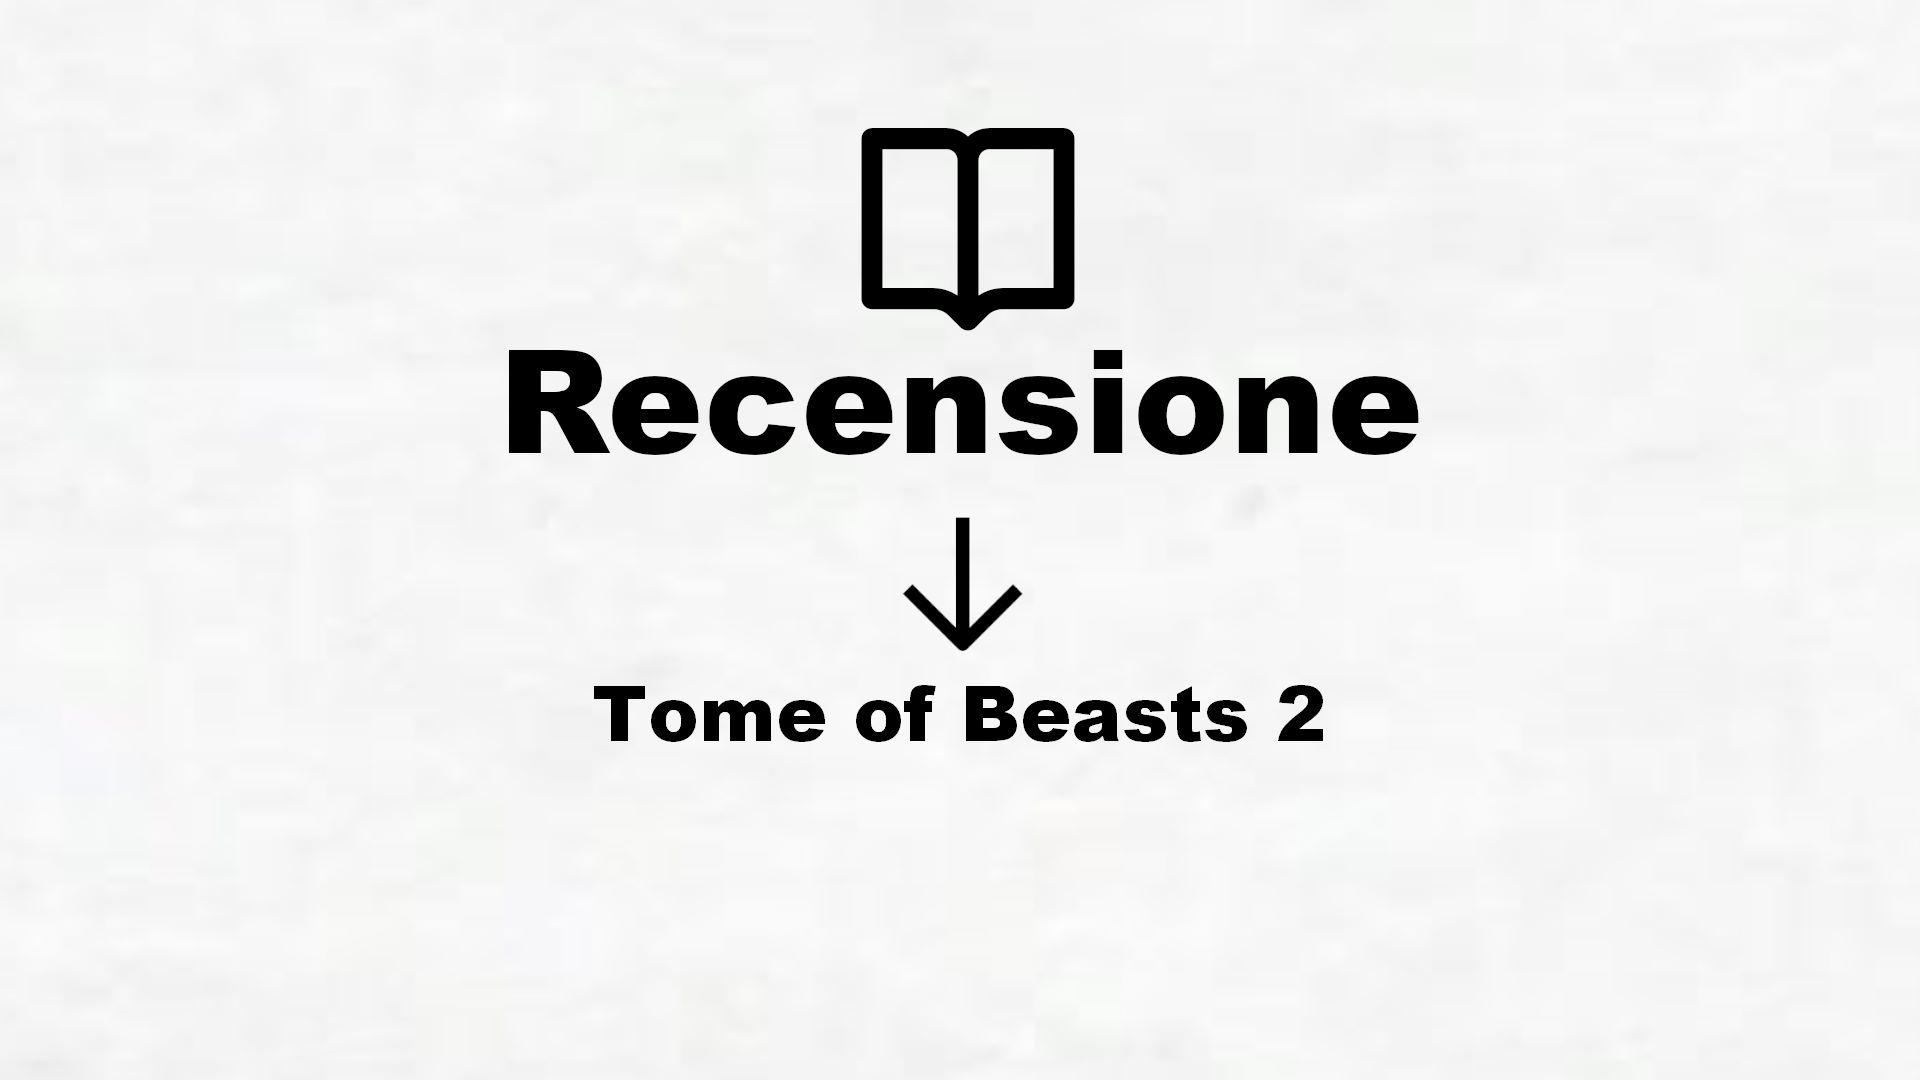 Tome of Beasts 2 – Recensione Libro